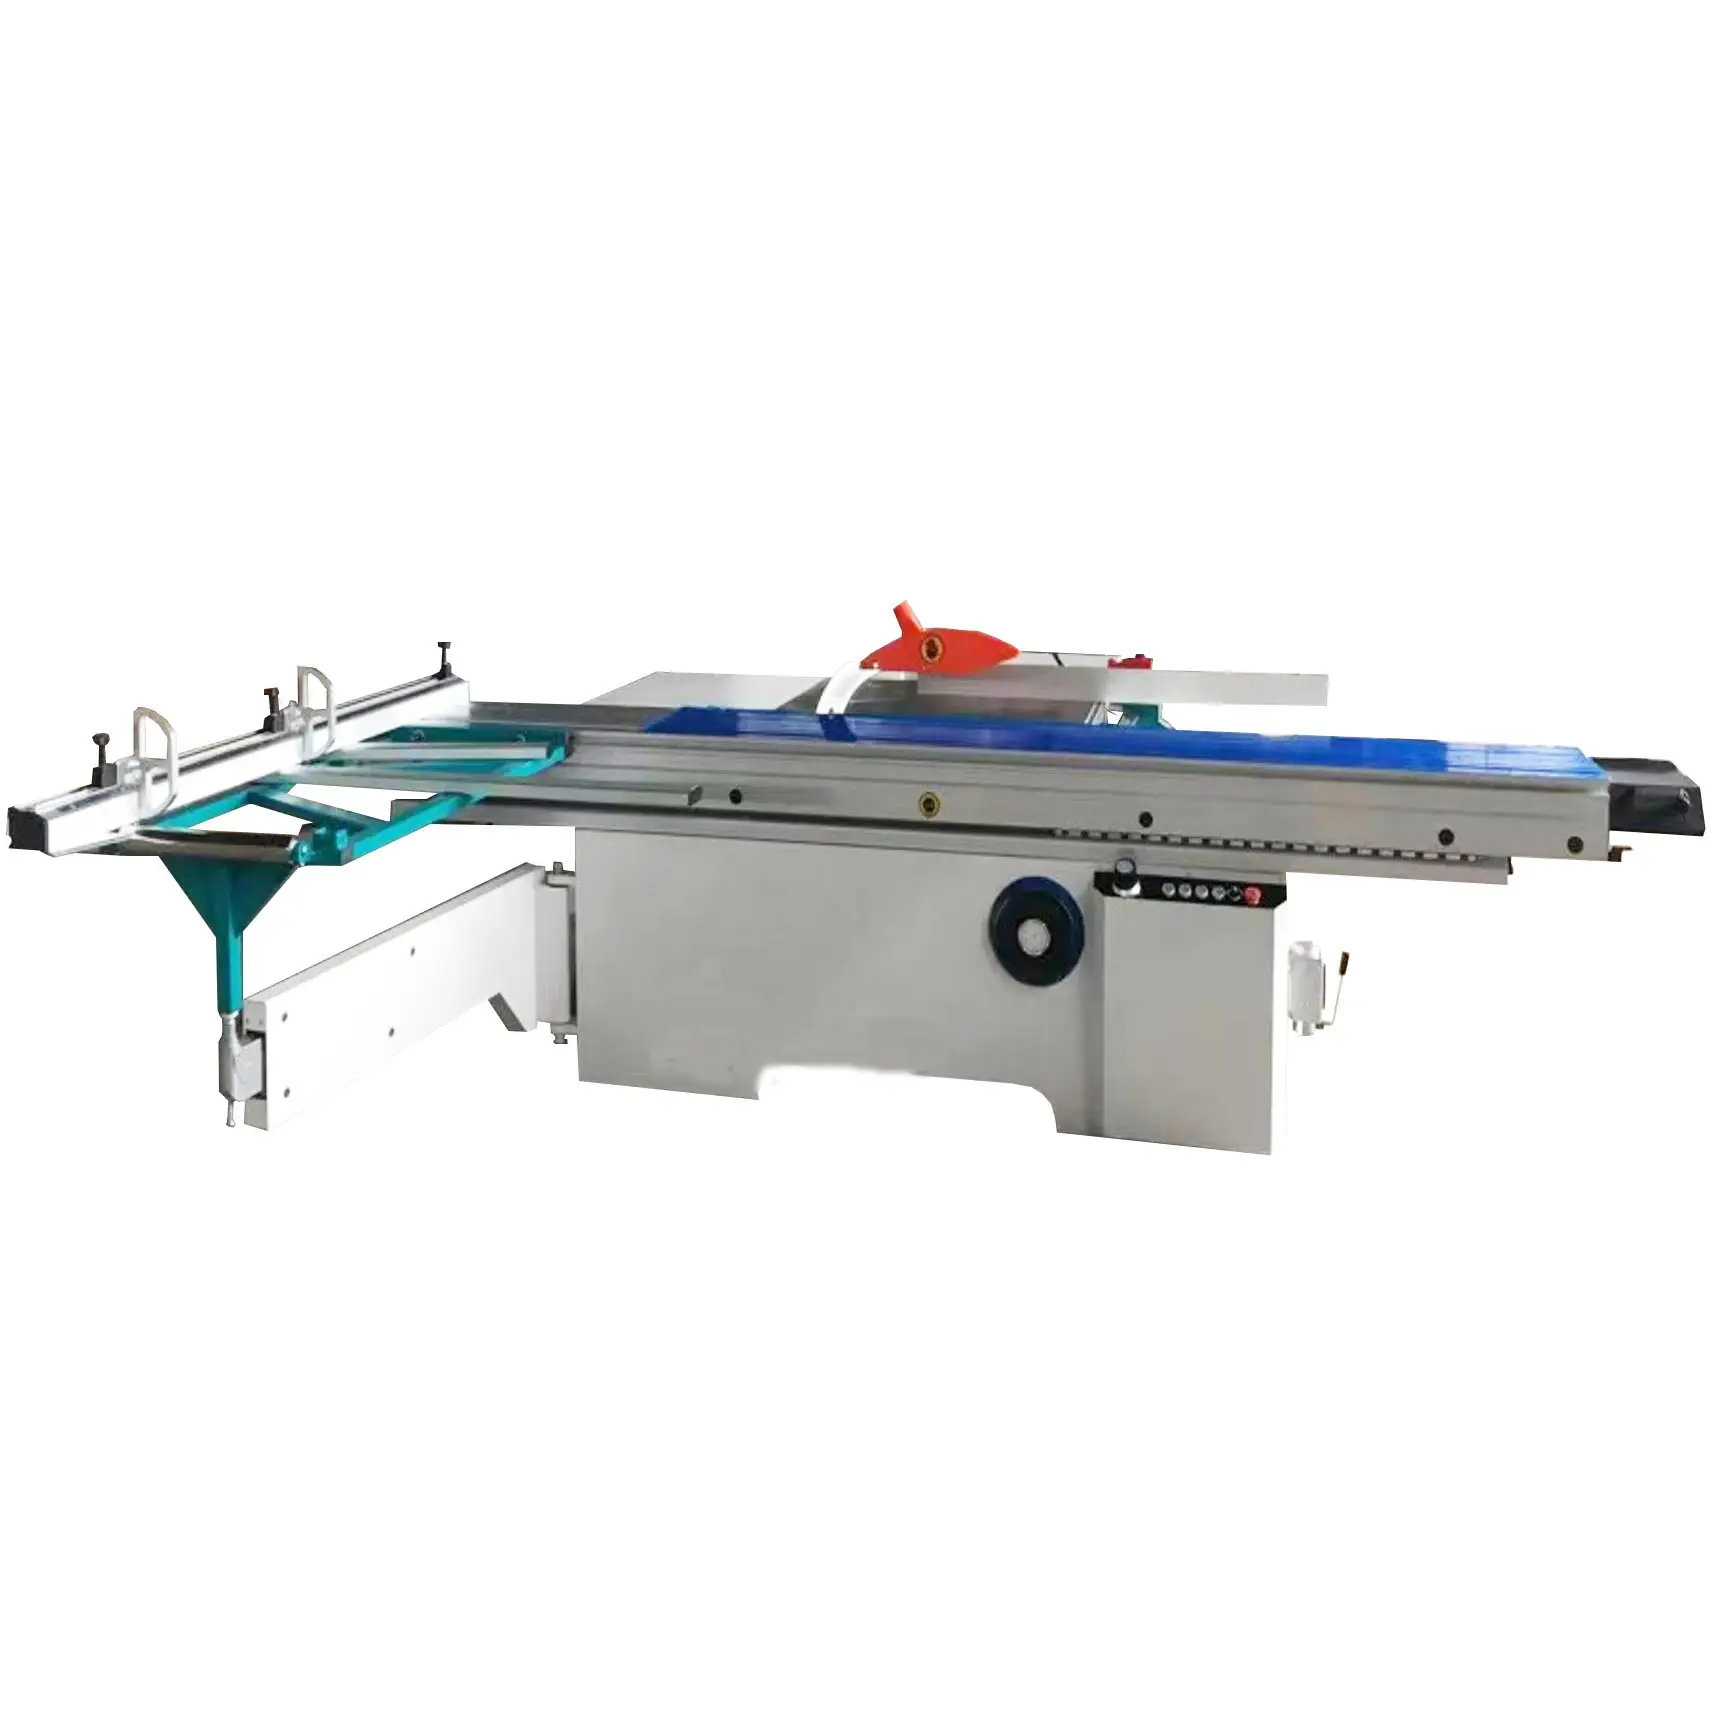 High Precision Woodworking Saw Cnc Panel Saw Sliding Table Saw With Automatic Fence